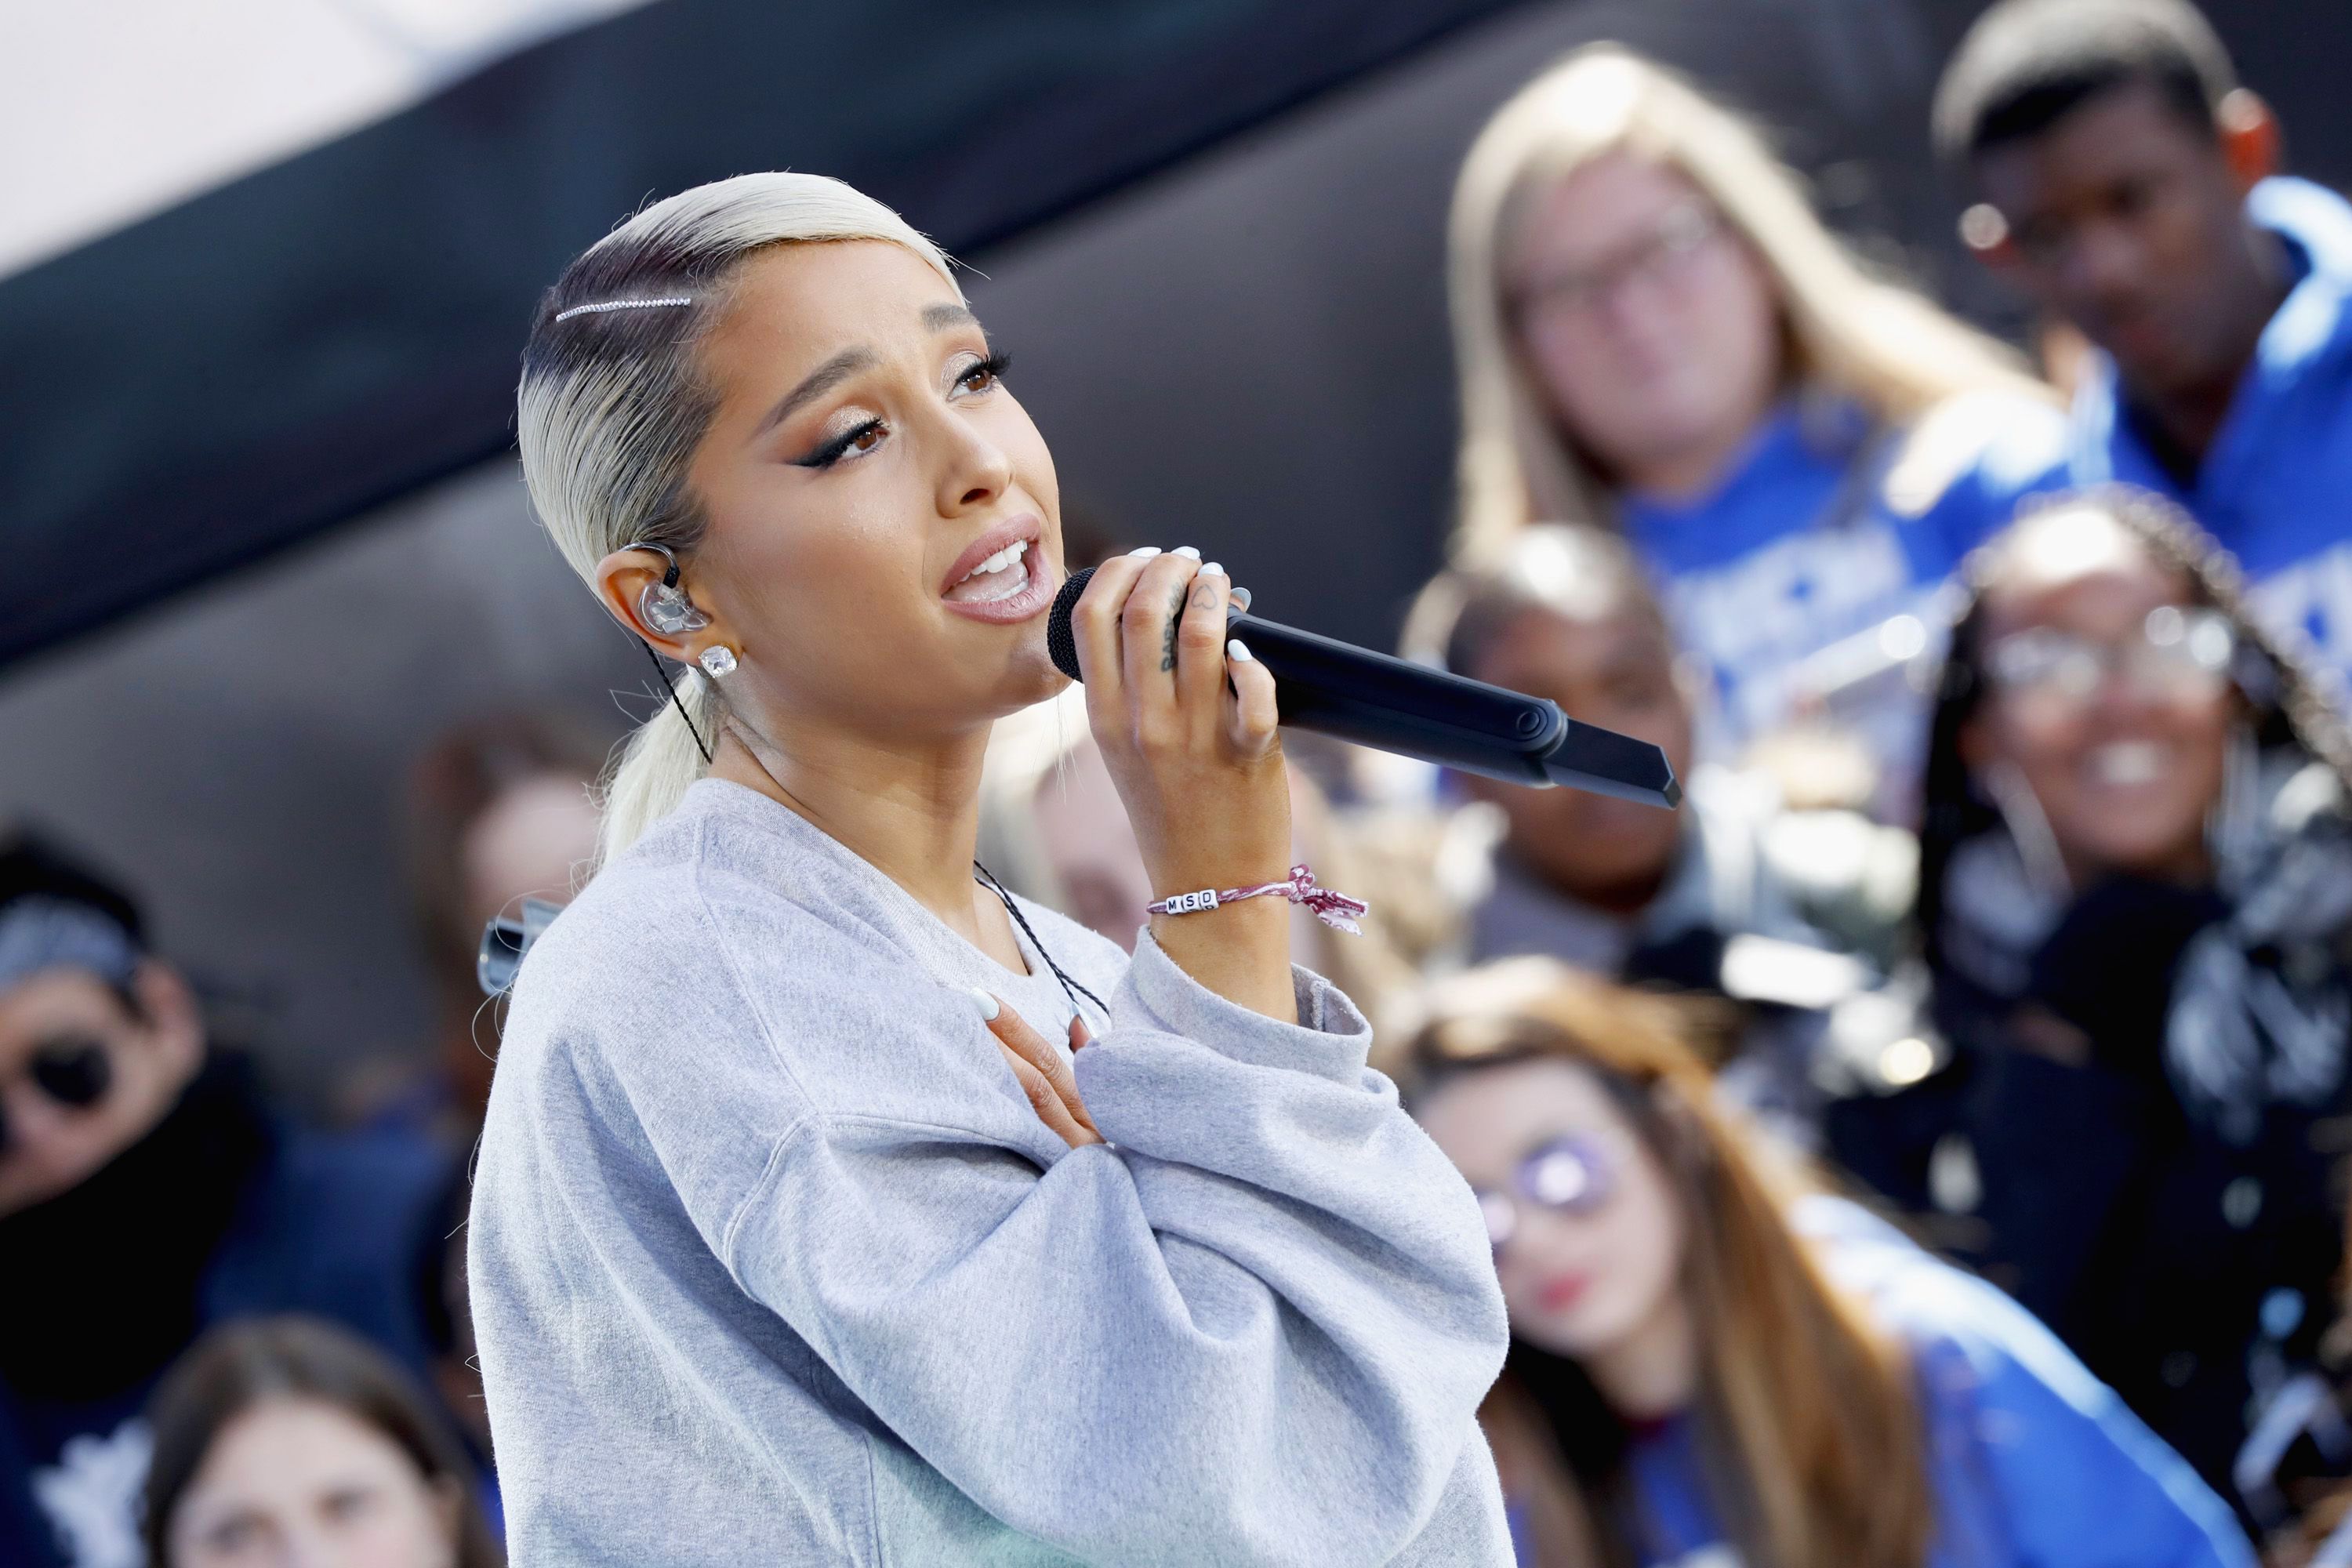 Why Pete Davidsons Ariana Grande Tattoo Has Been Covered Up